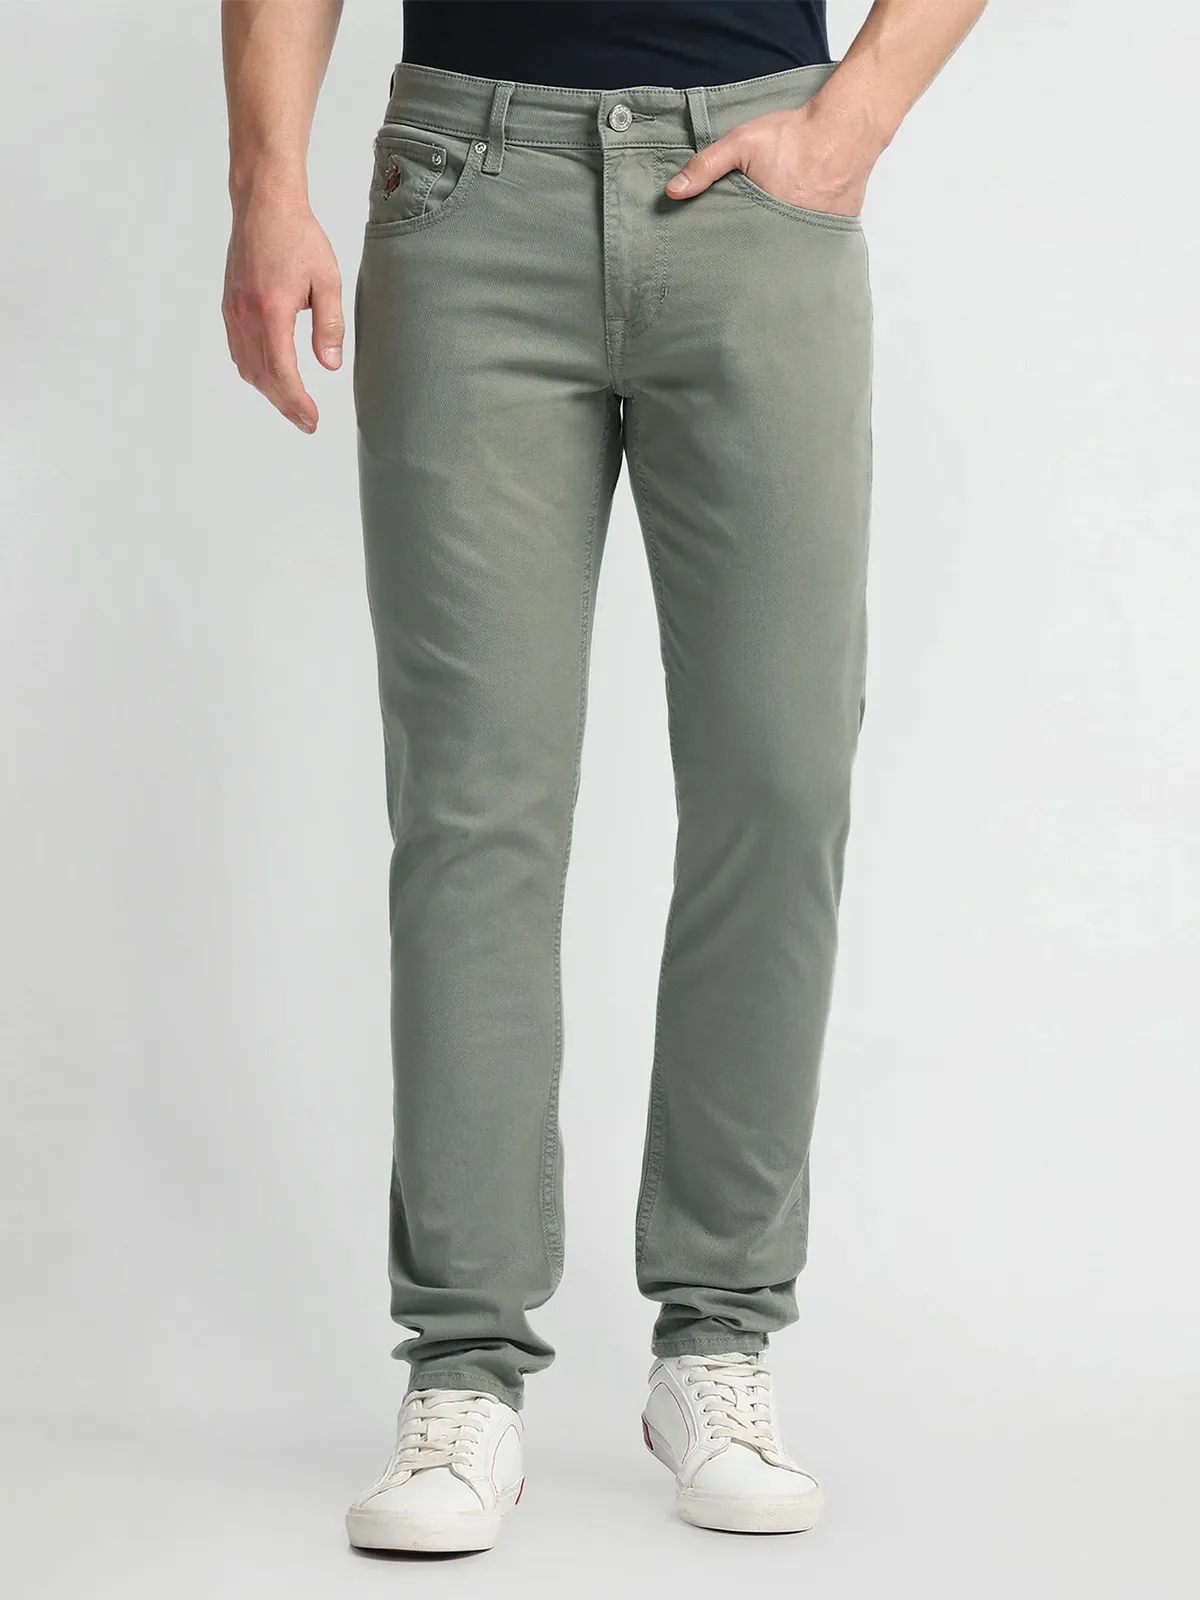 U S POLO ASSN olive solid jeans